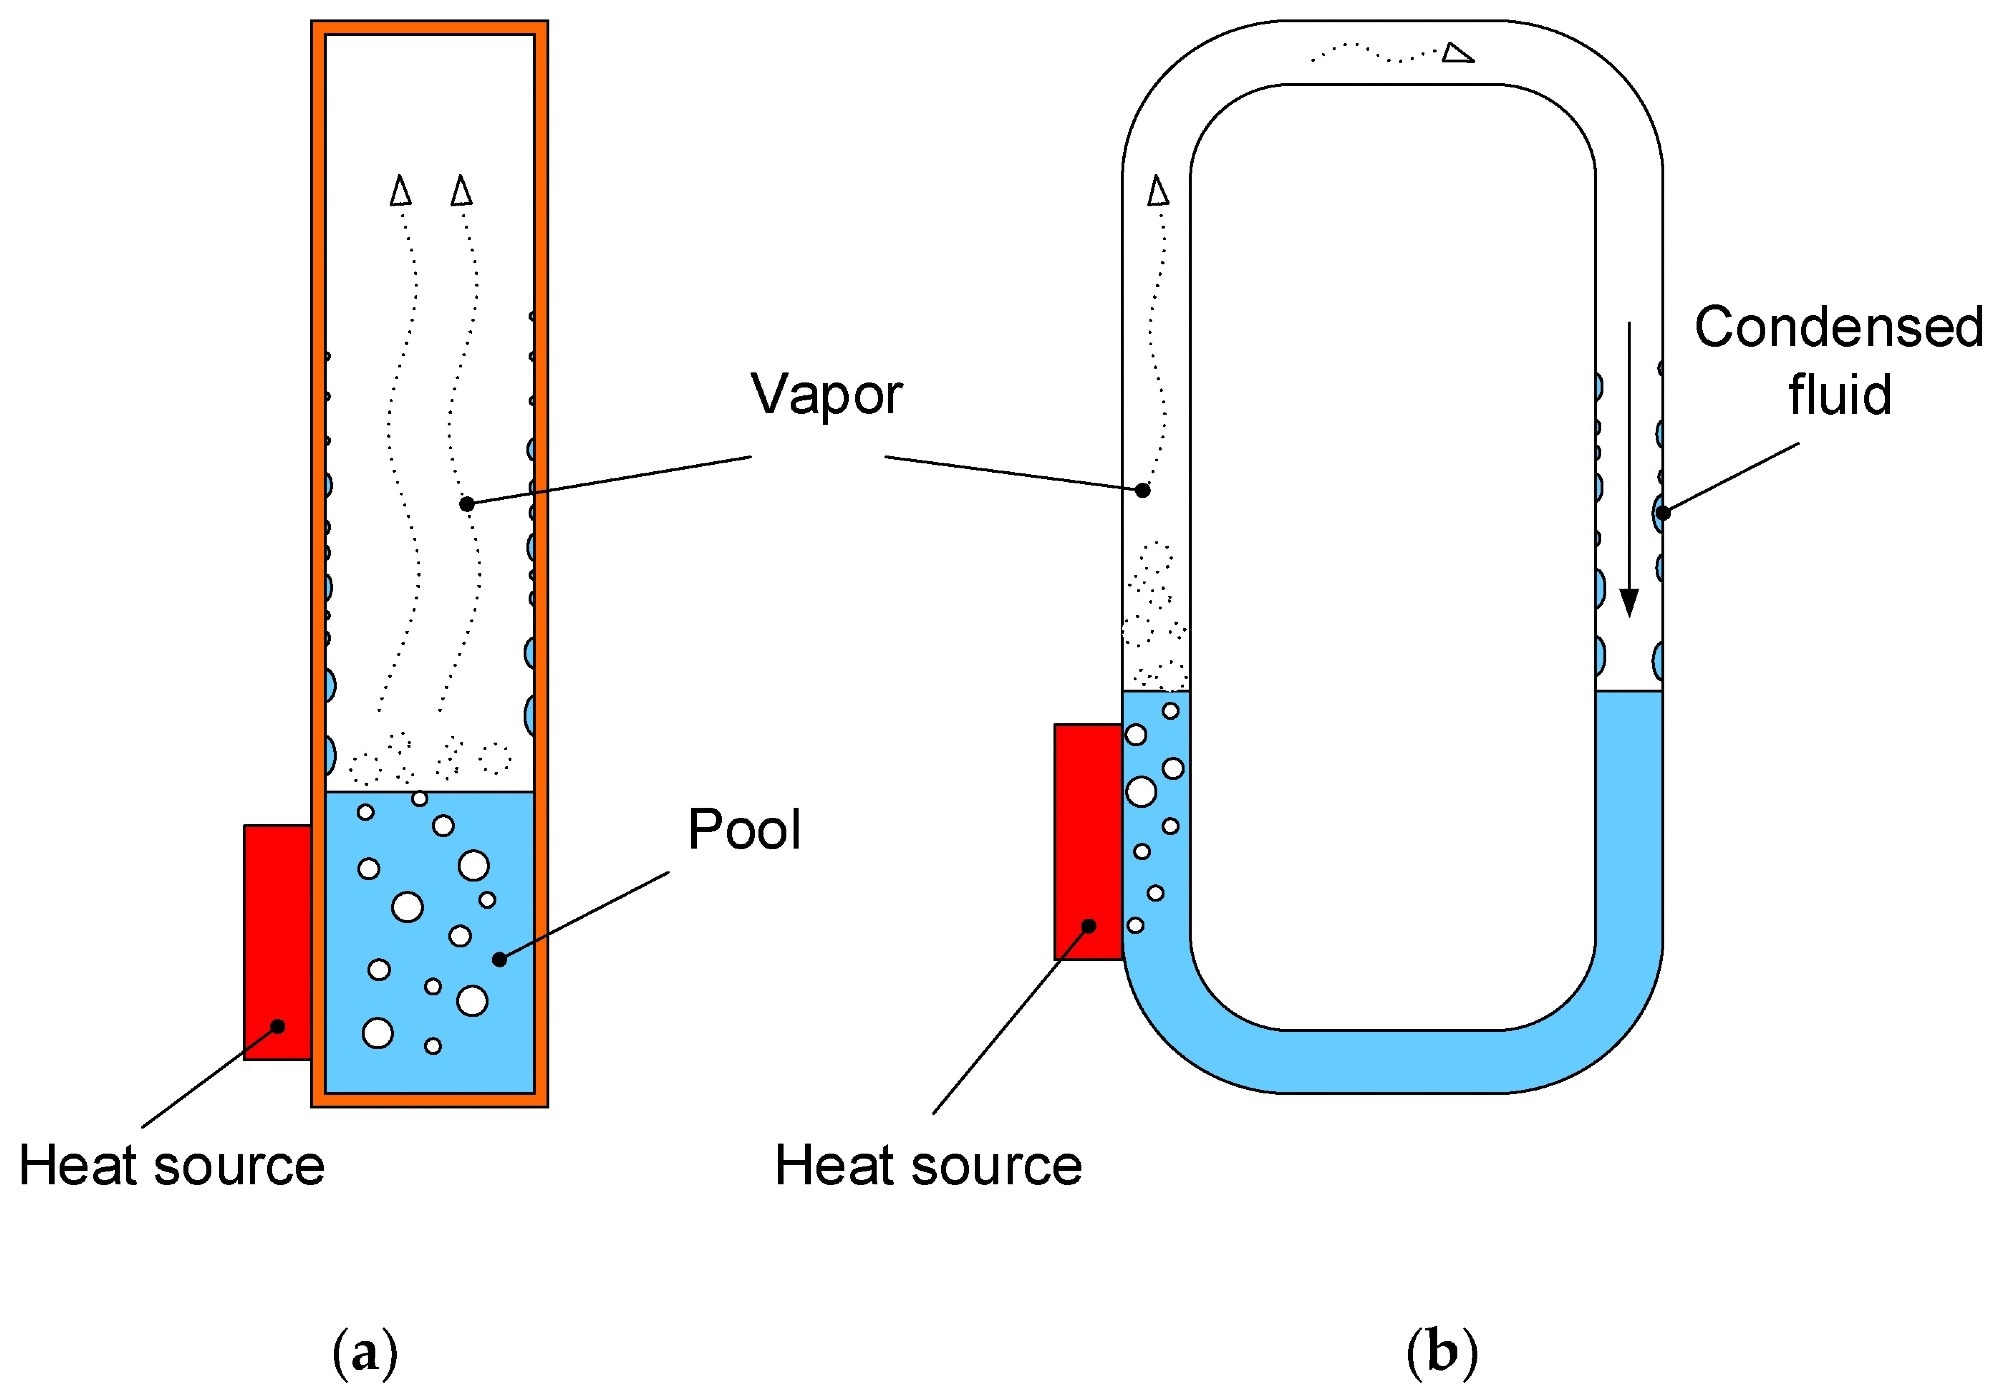 Schematic representation of (a) counter-flow thermosiphon and (b) loop thermosiphon.